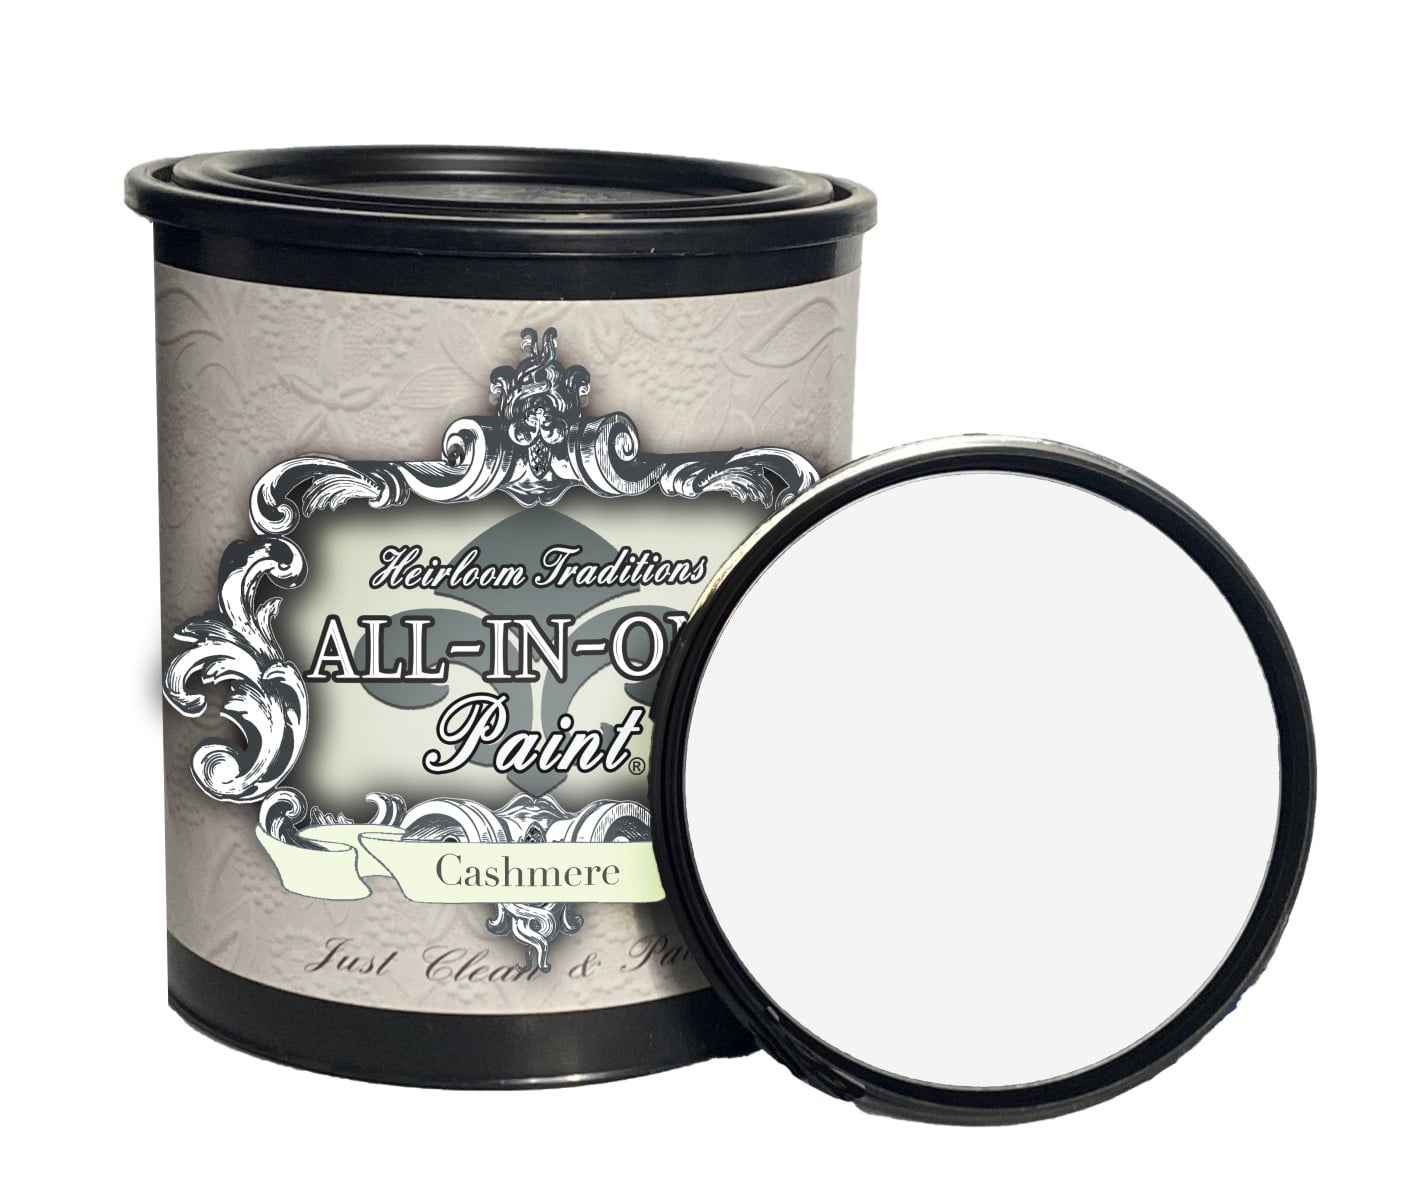 Heirloom Traditions ALL-IN-ONE Paint  Heirloom traditions, Heirloom  traditions paint, Painting cabinets